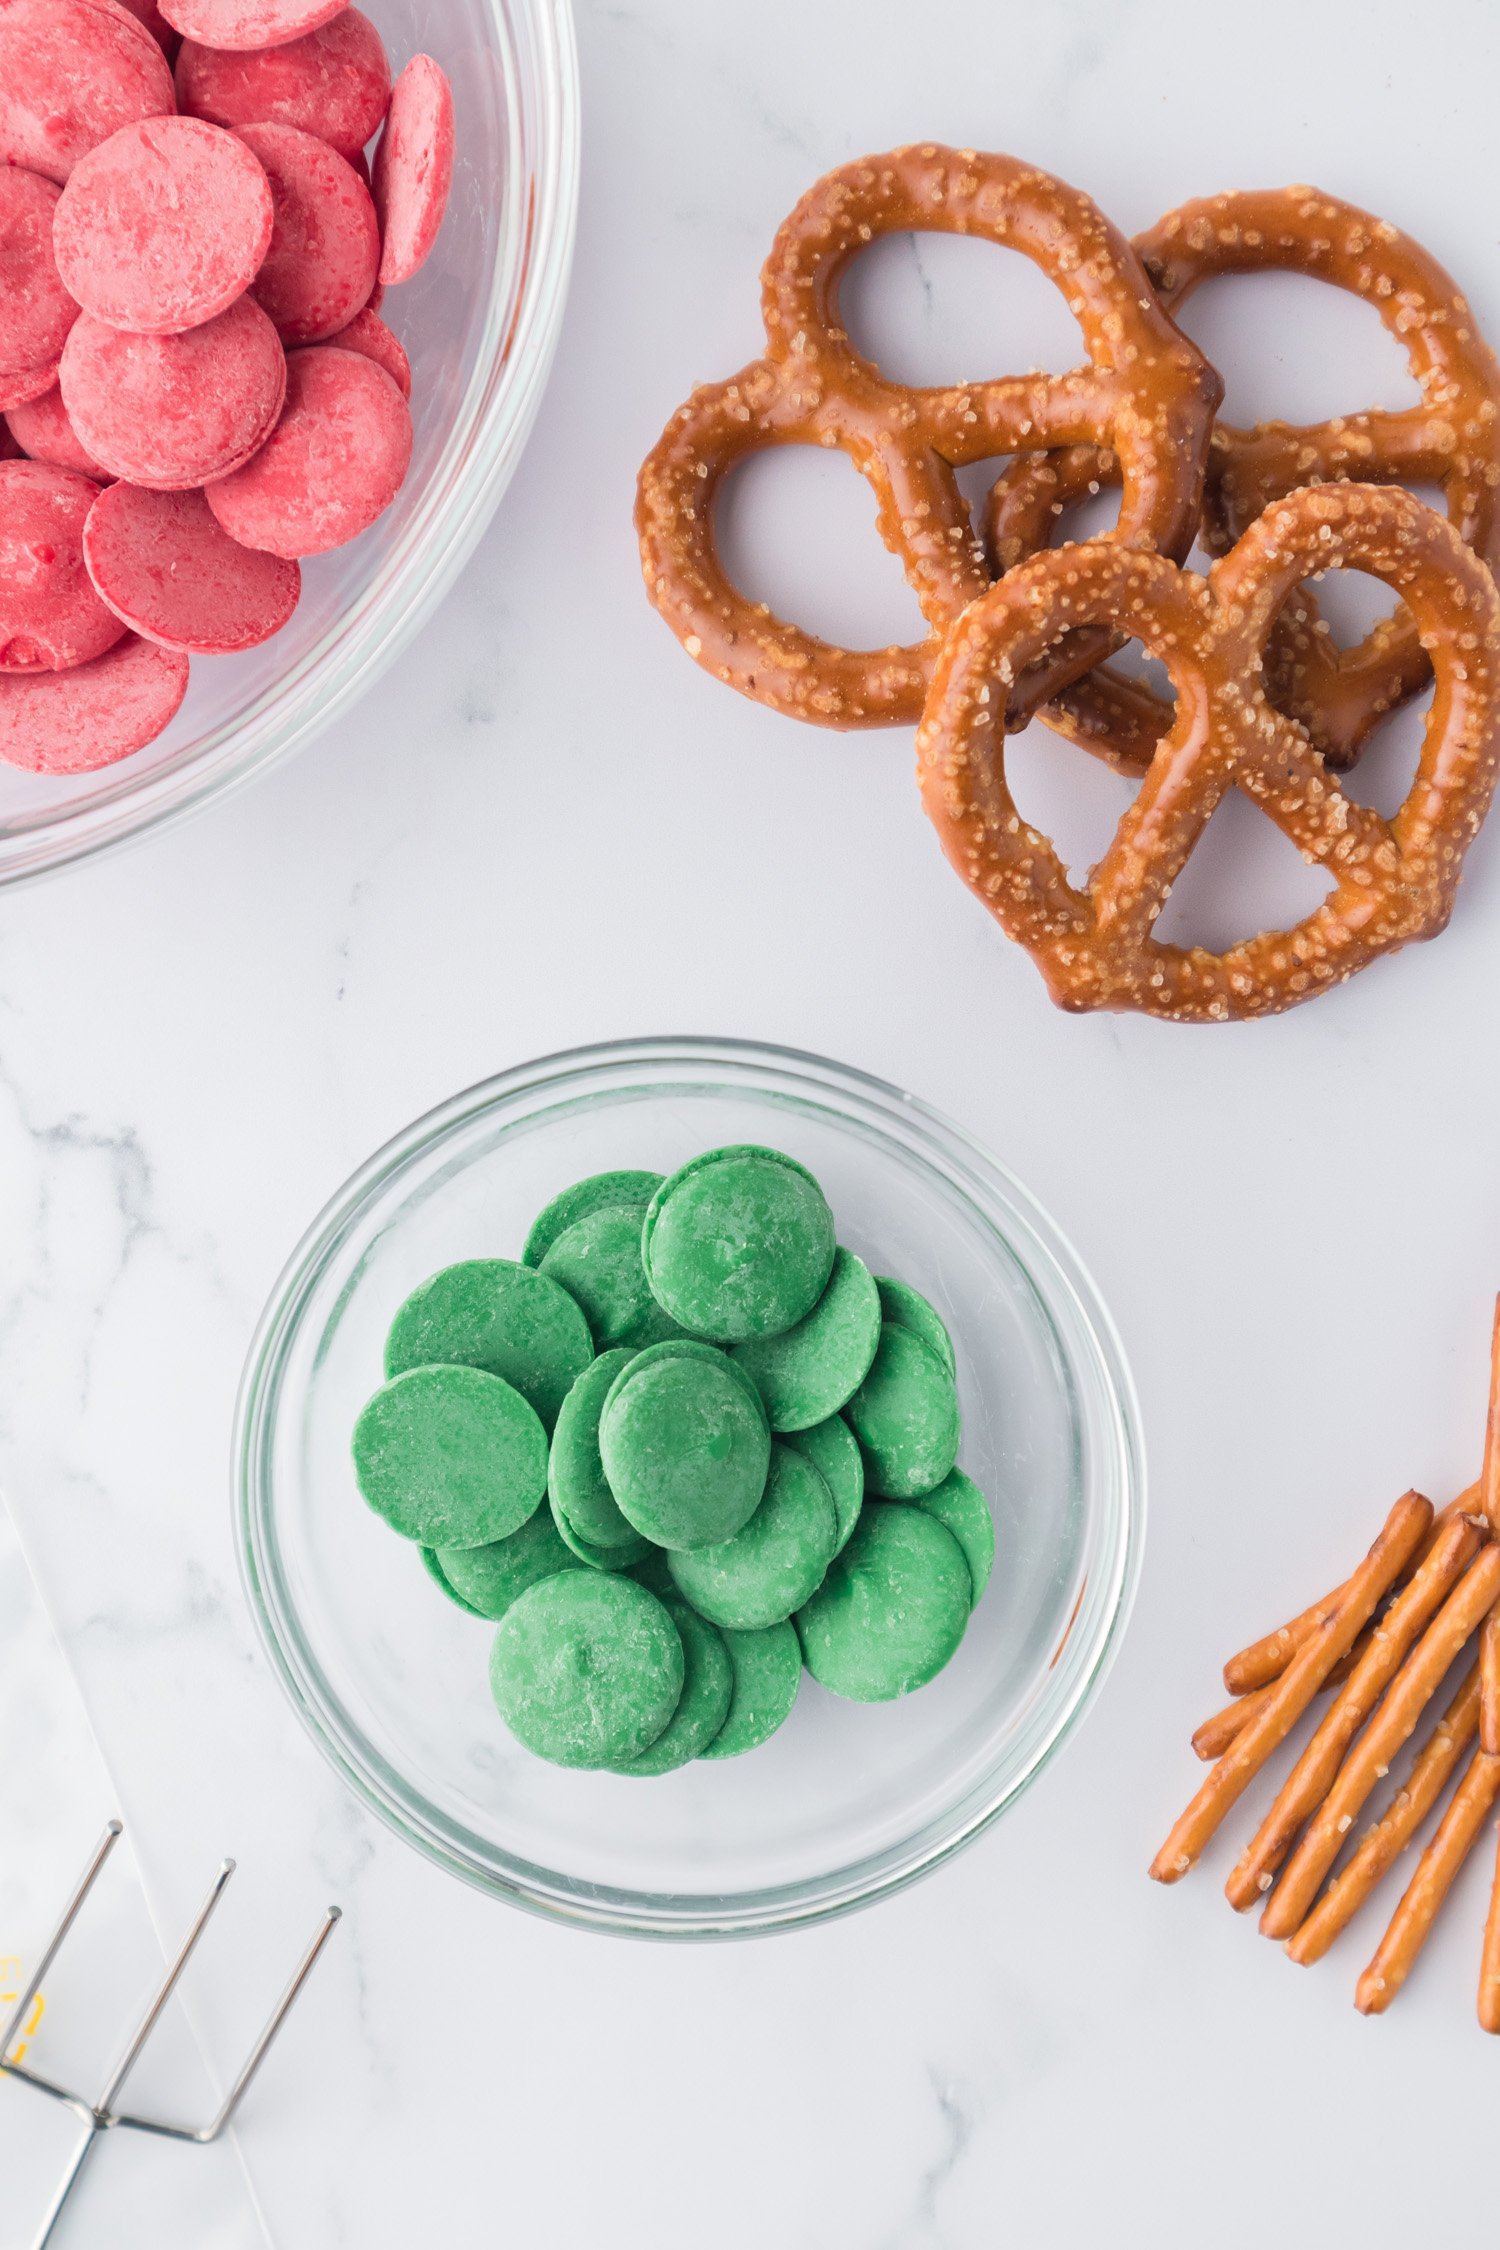 green candy melts in bowl with pretzels nearby